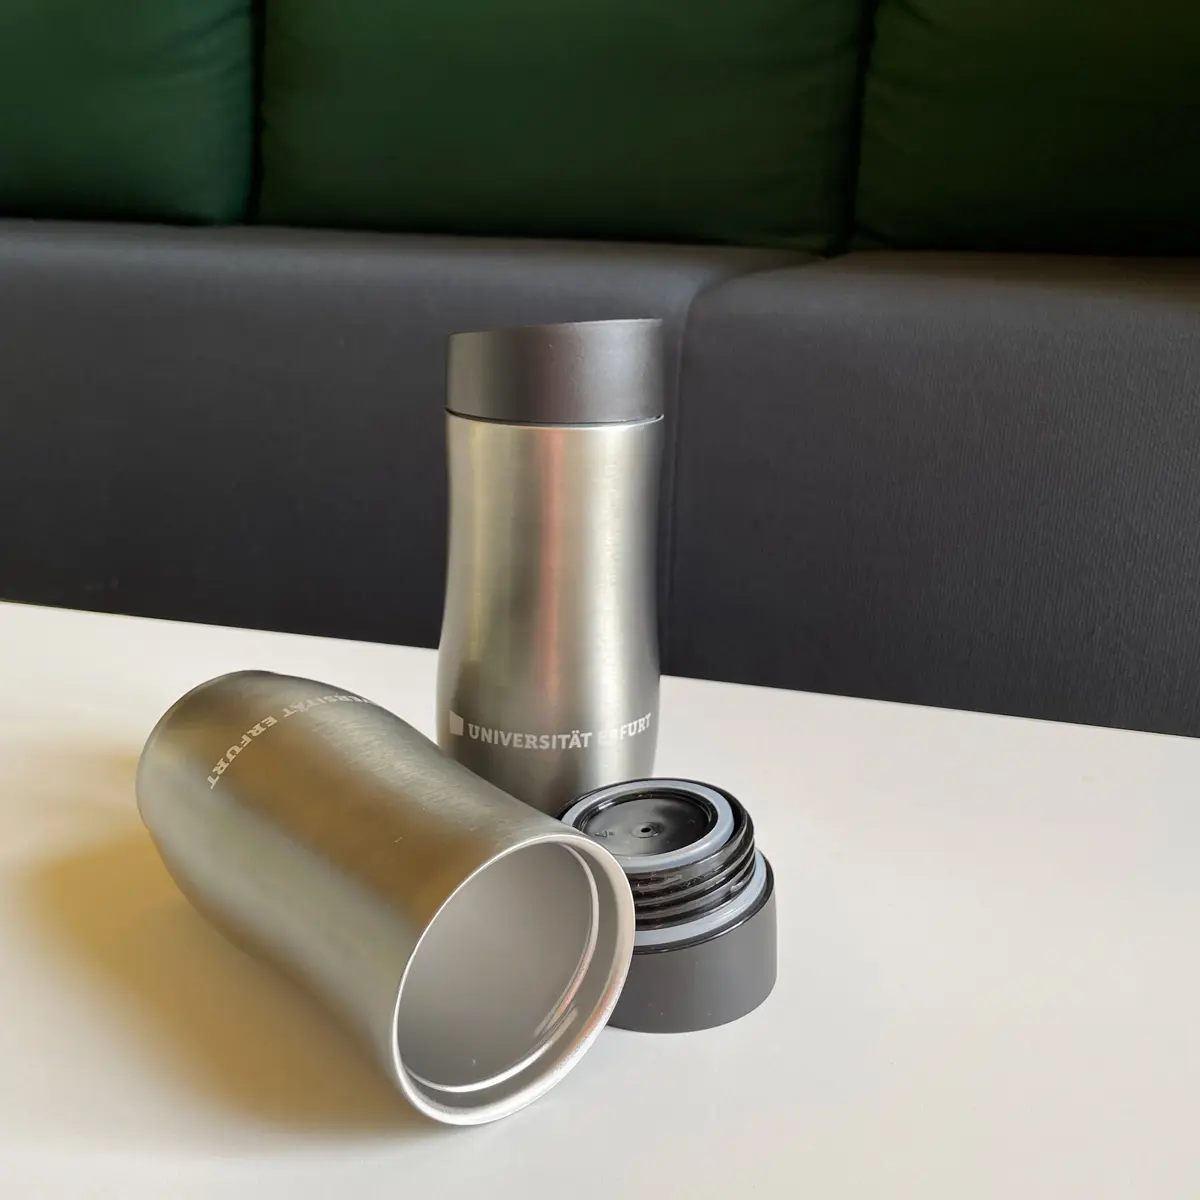 Stainless steel thermo mug with Uni logo